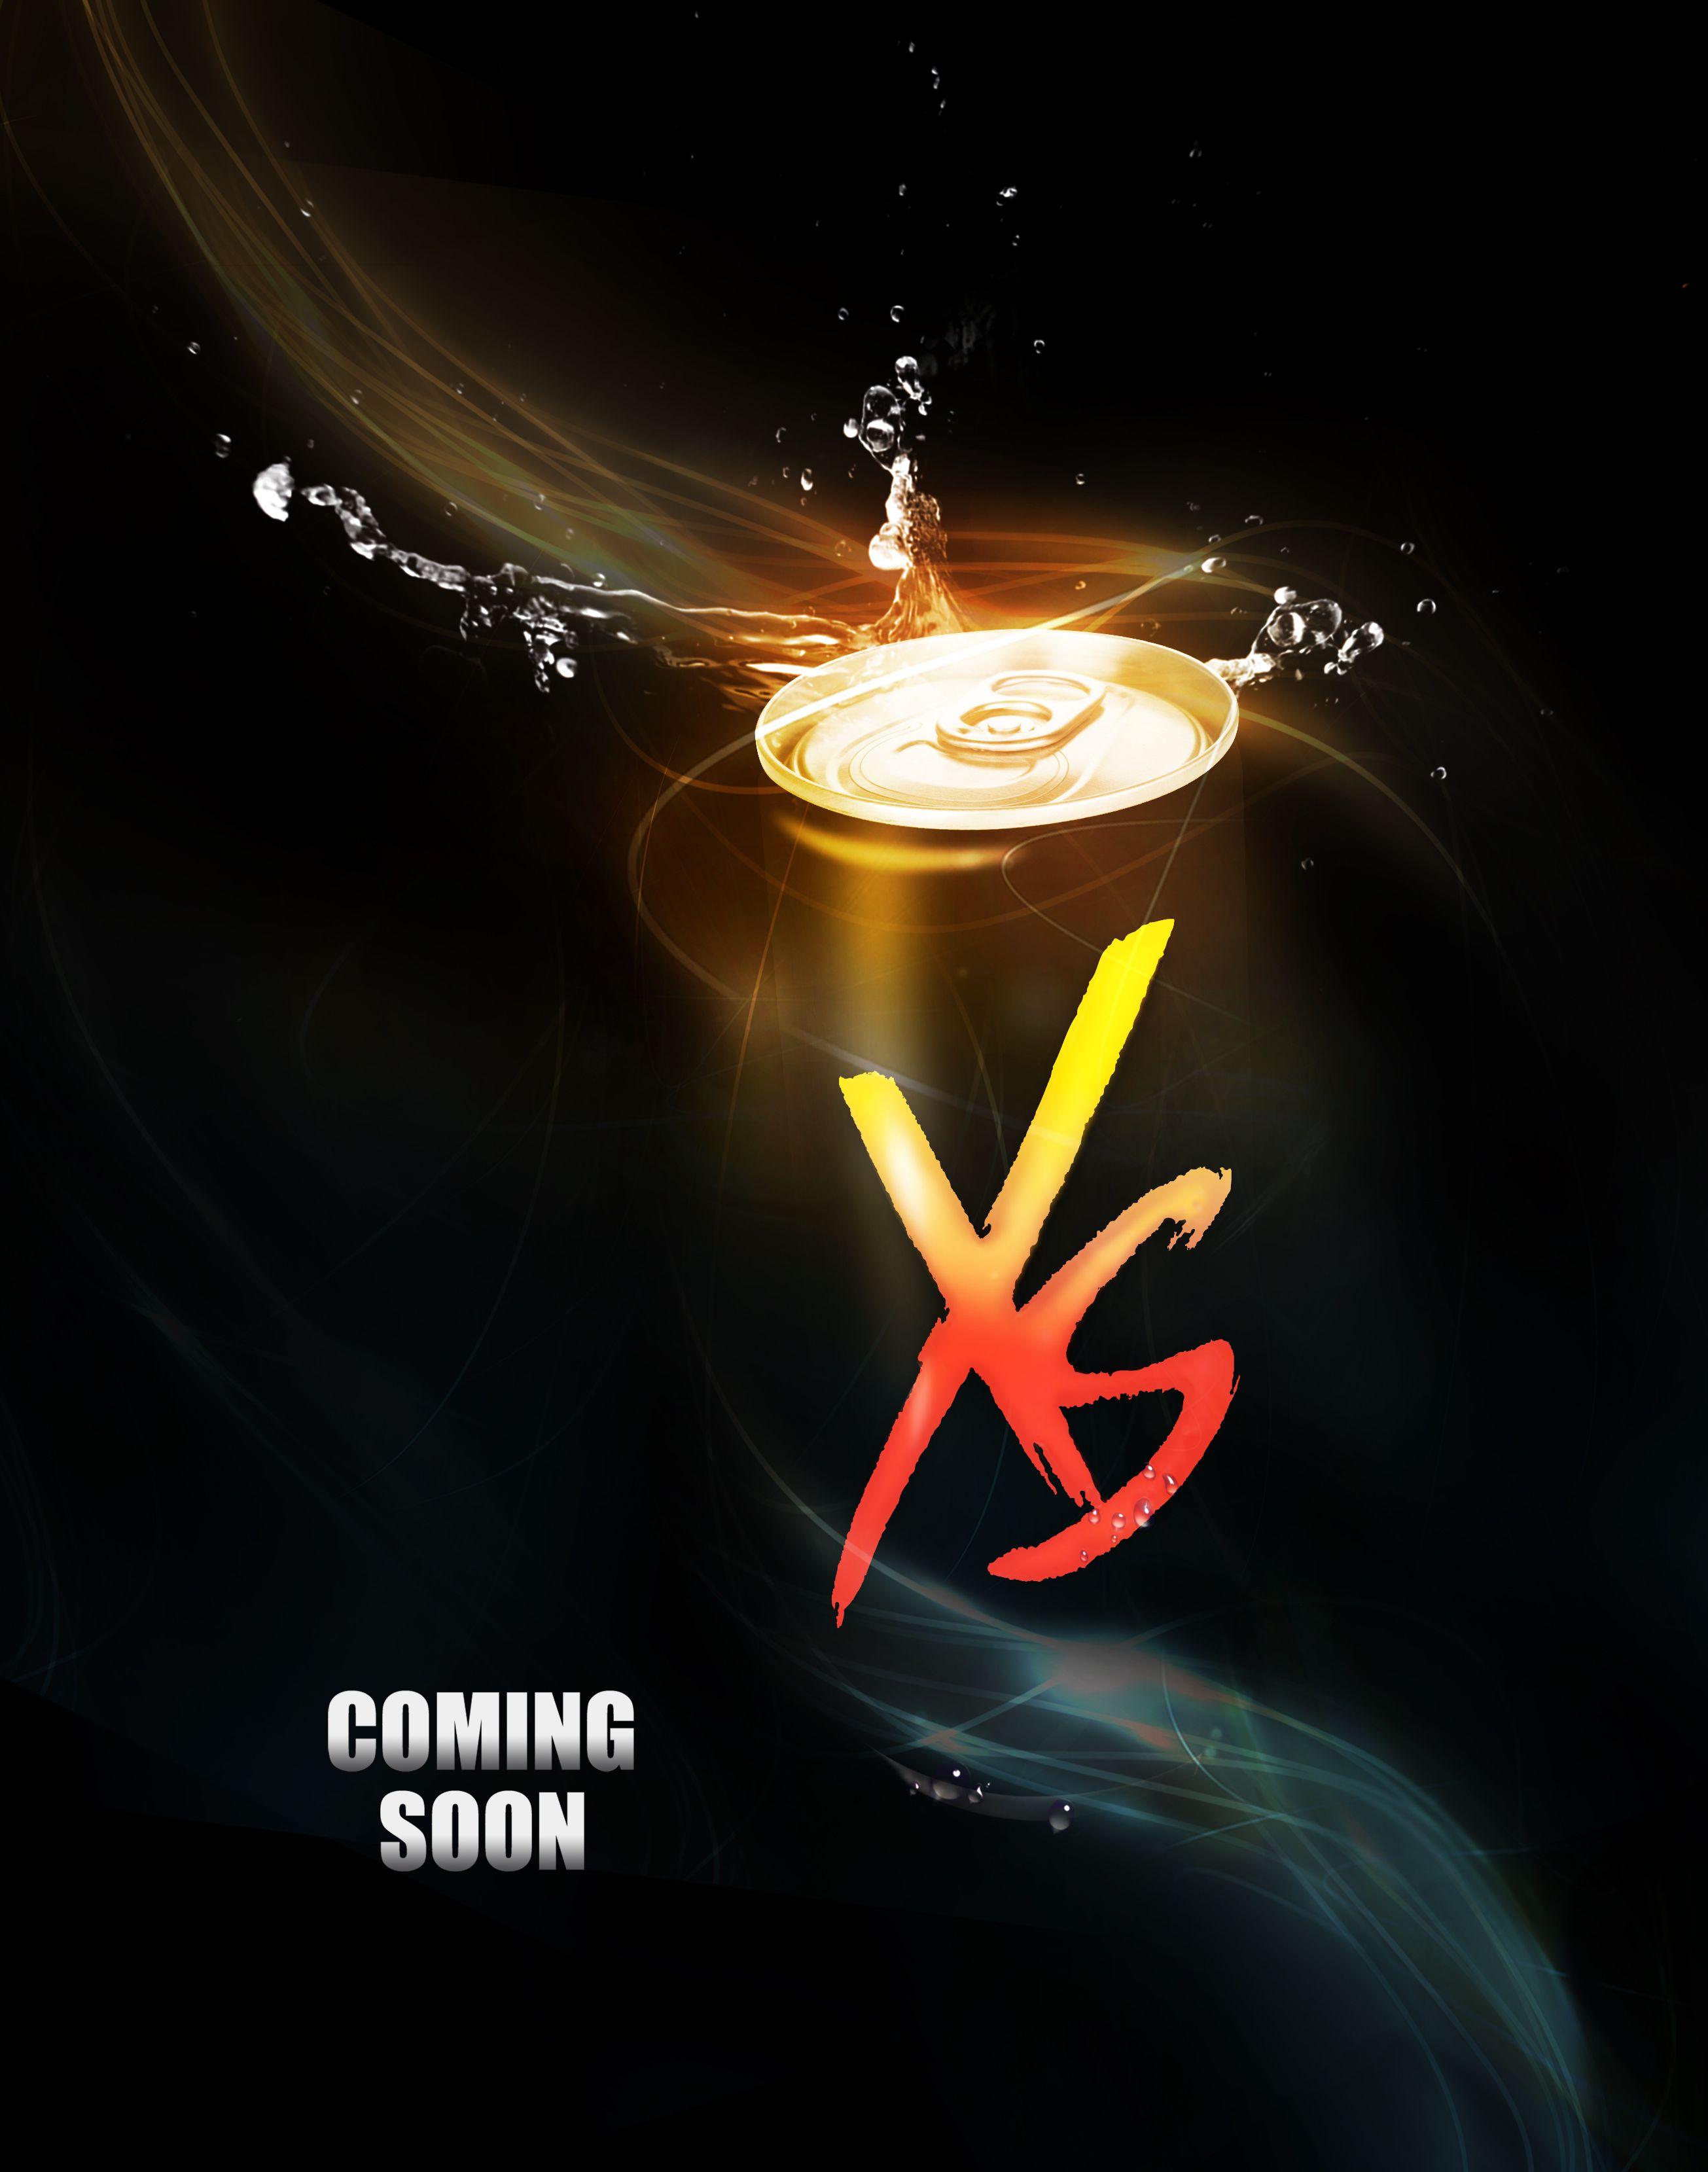 XS Energy Drink Logo - XS Energy Drink Teaser AD Design by gtl communication. Ryan's Amway